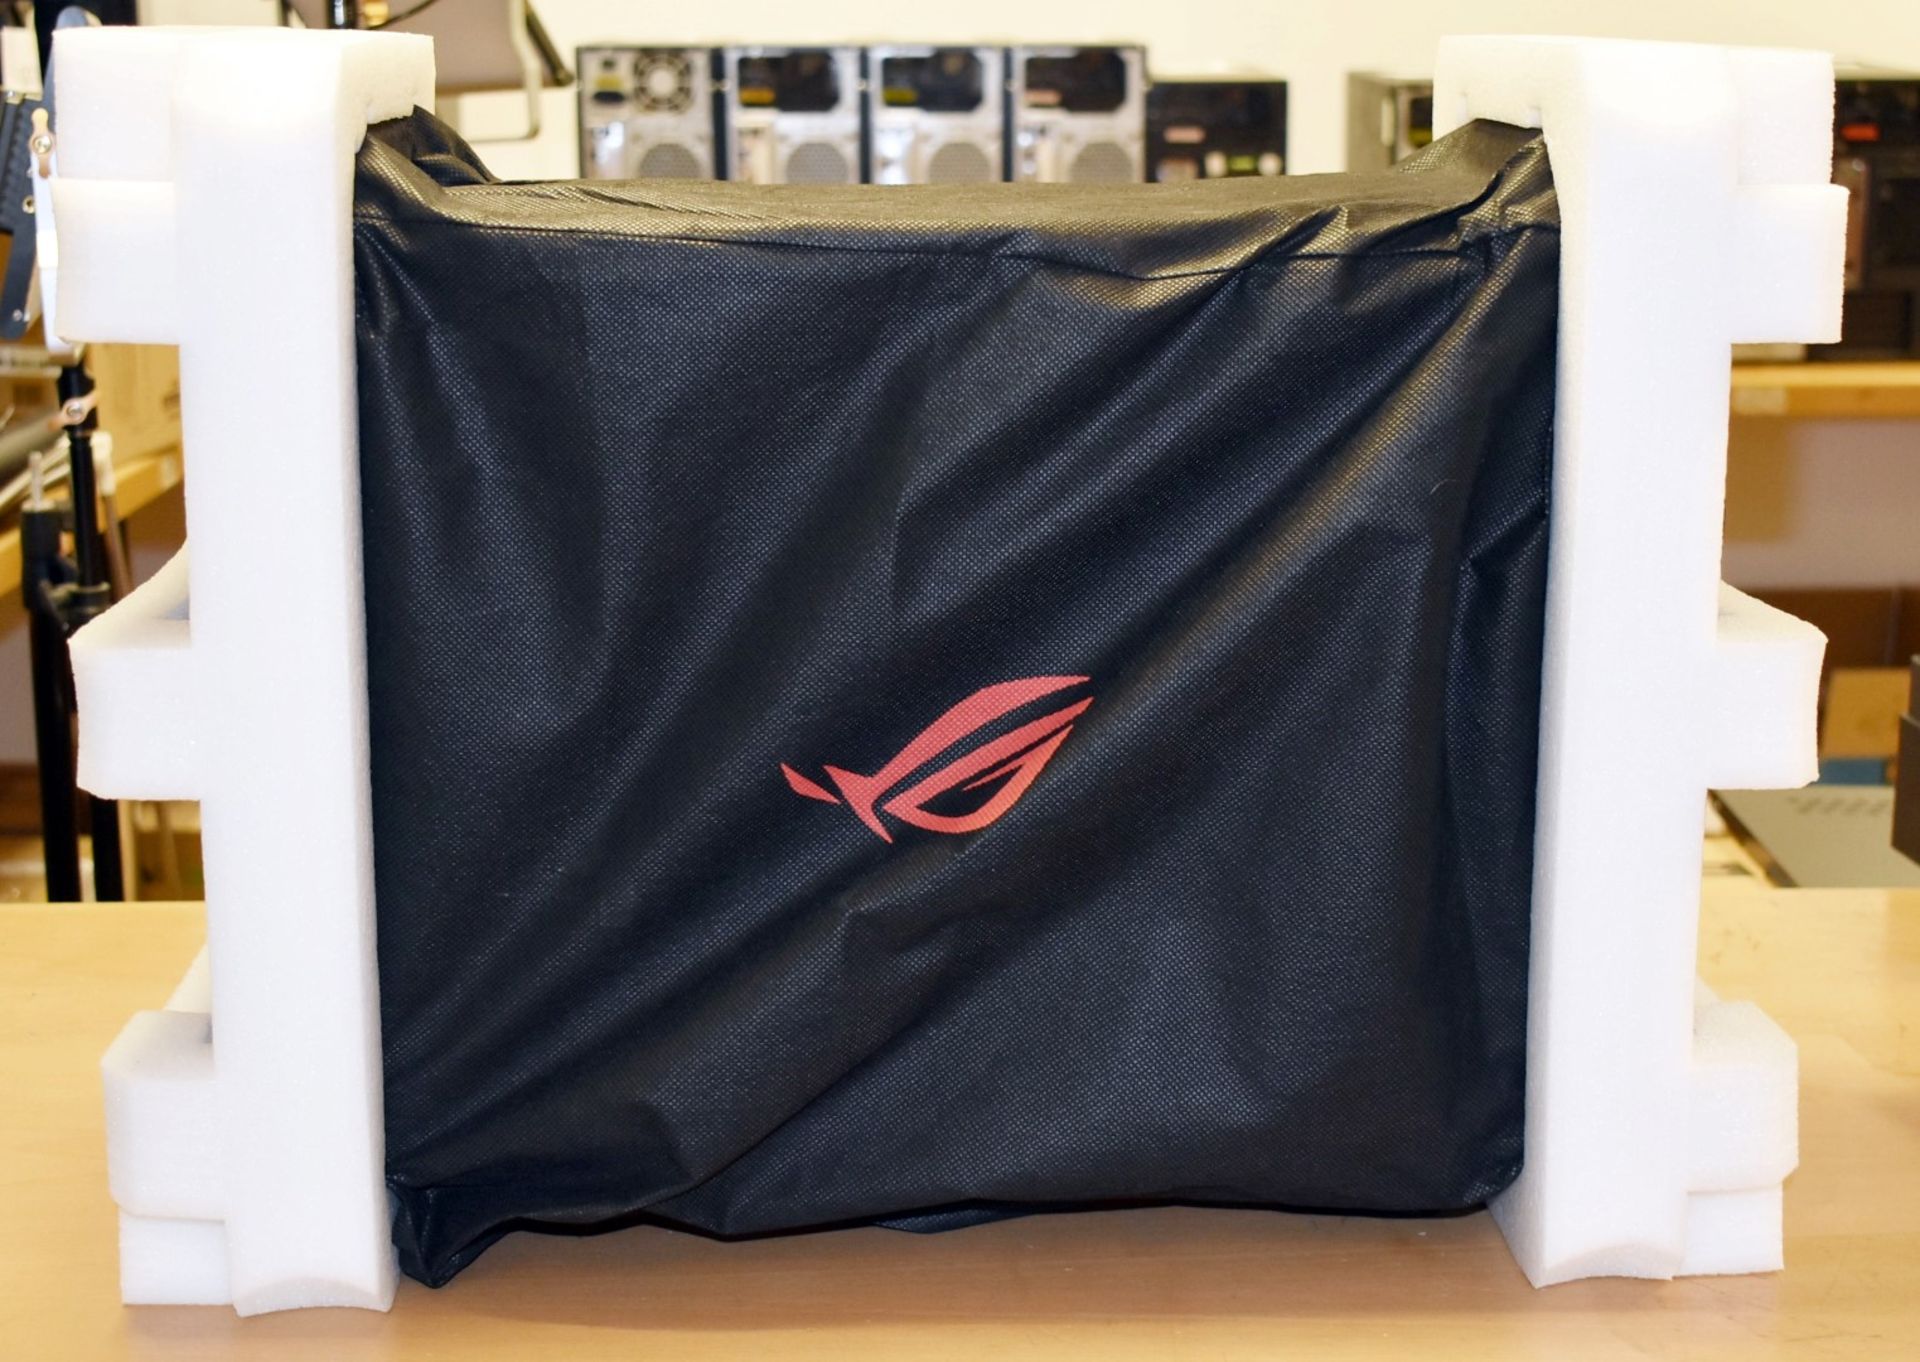 1 x Asus ROG Z11 Mini-ITX PC Gaming Case - Black Finish With Side Window and Limited Edition - Image 12 of 15